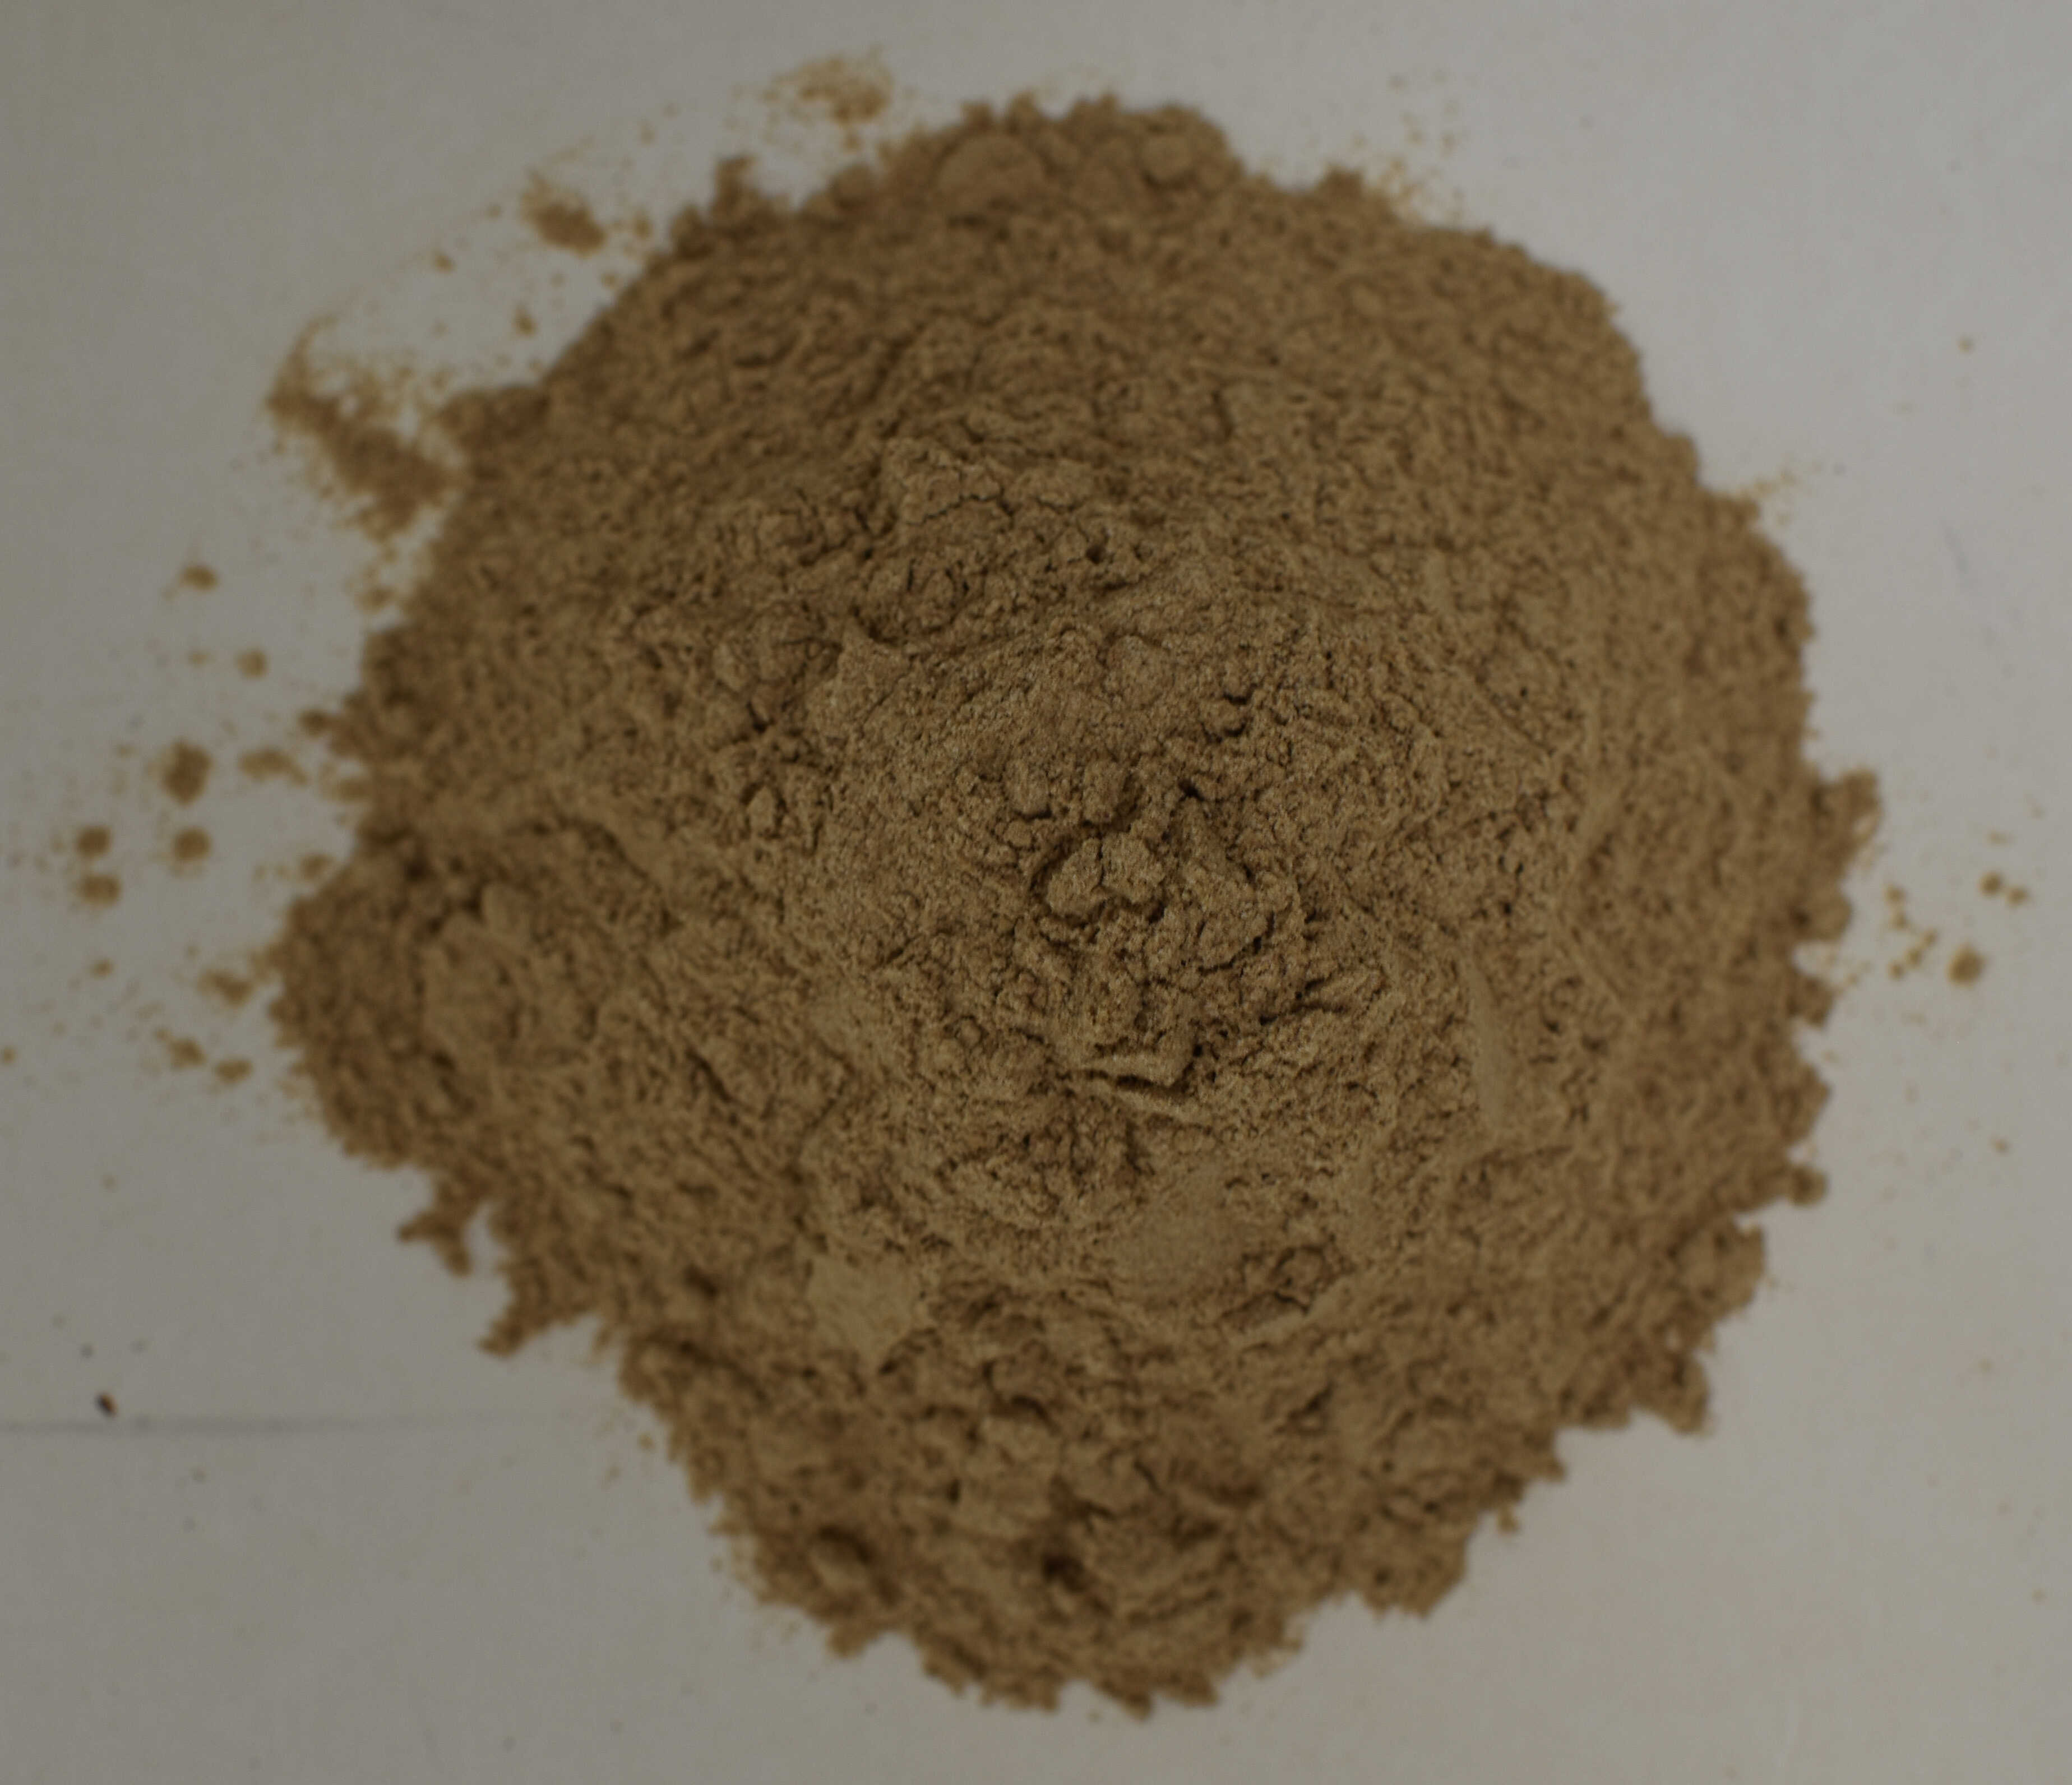 American Ginseng 10:1 Extract - Top Photo